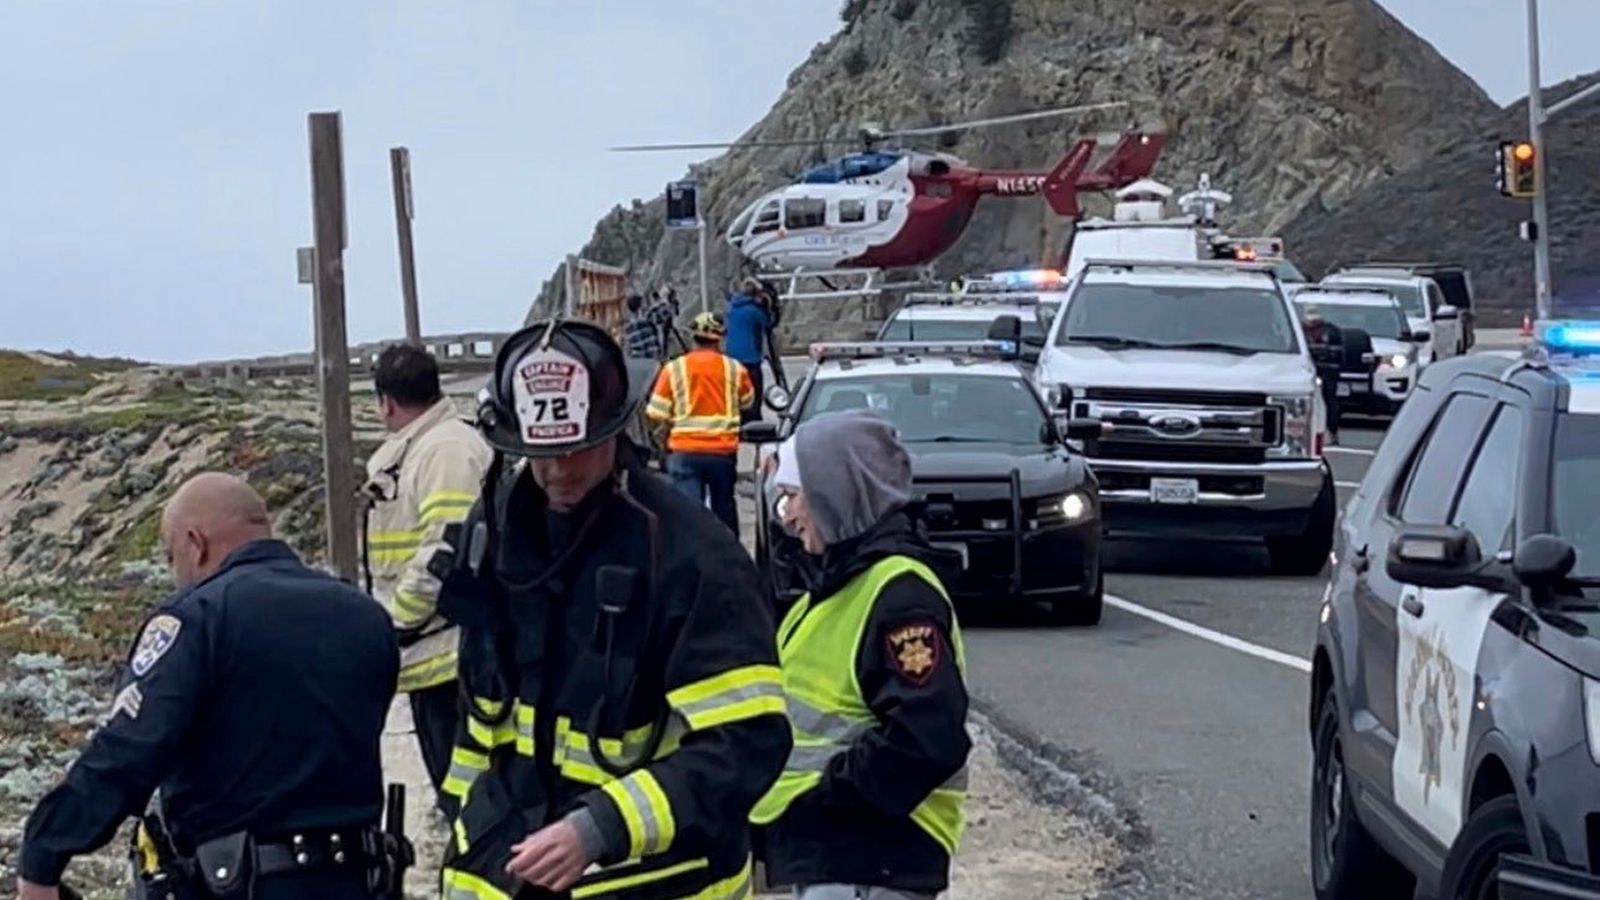 Two adults and two children survive after Tesla plunges 75m off cliff along Pacific Coast Highway in California